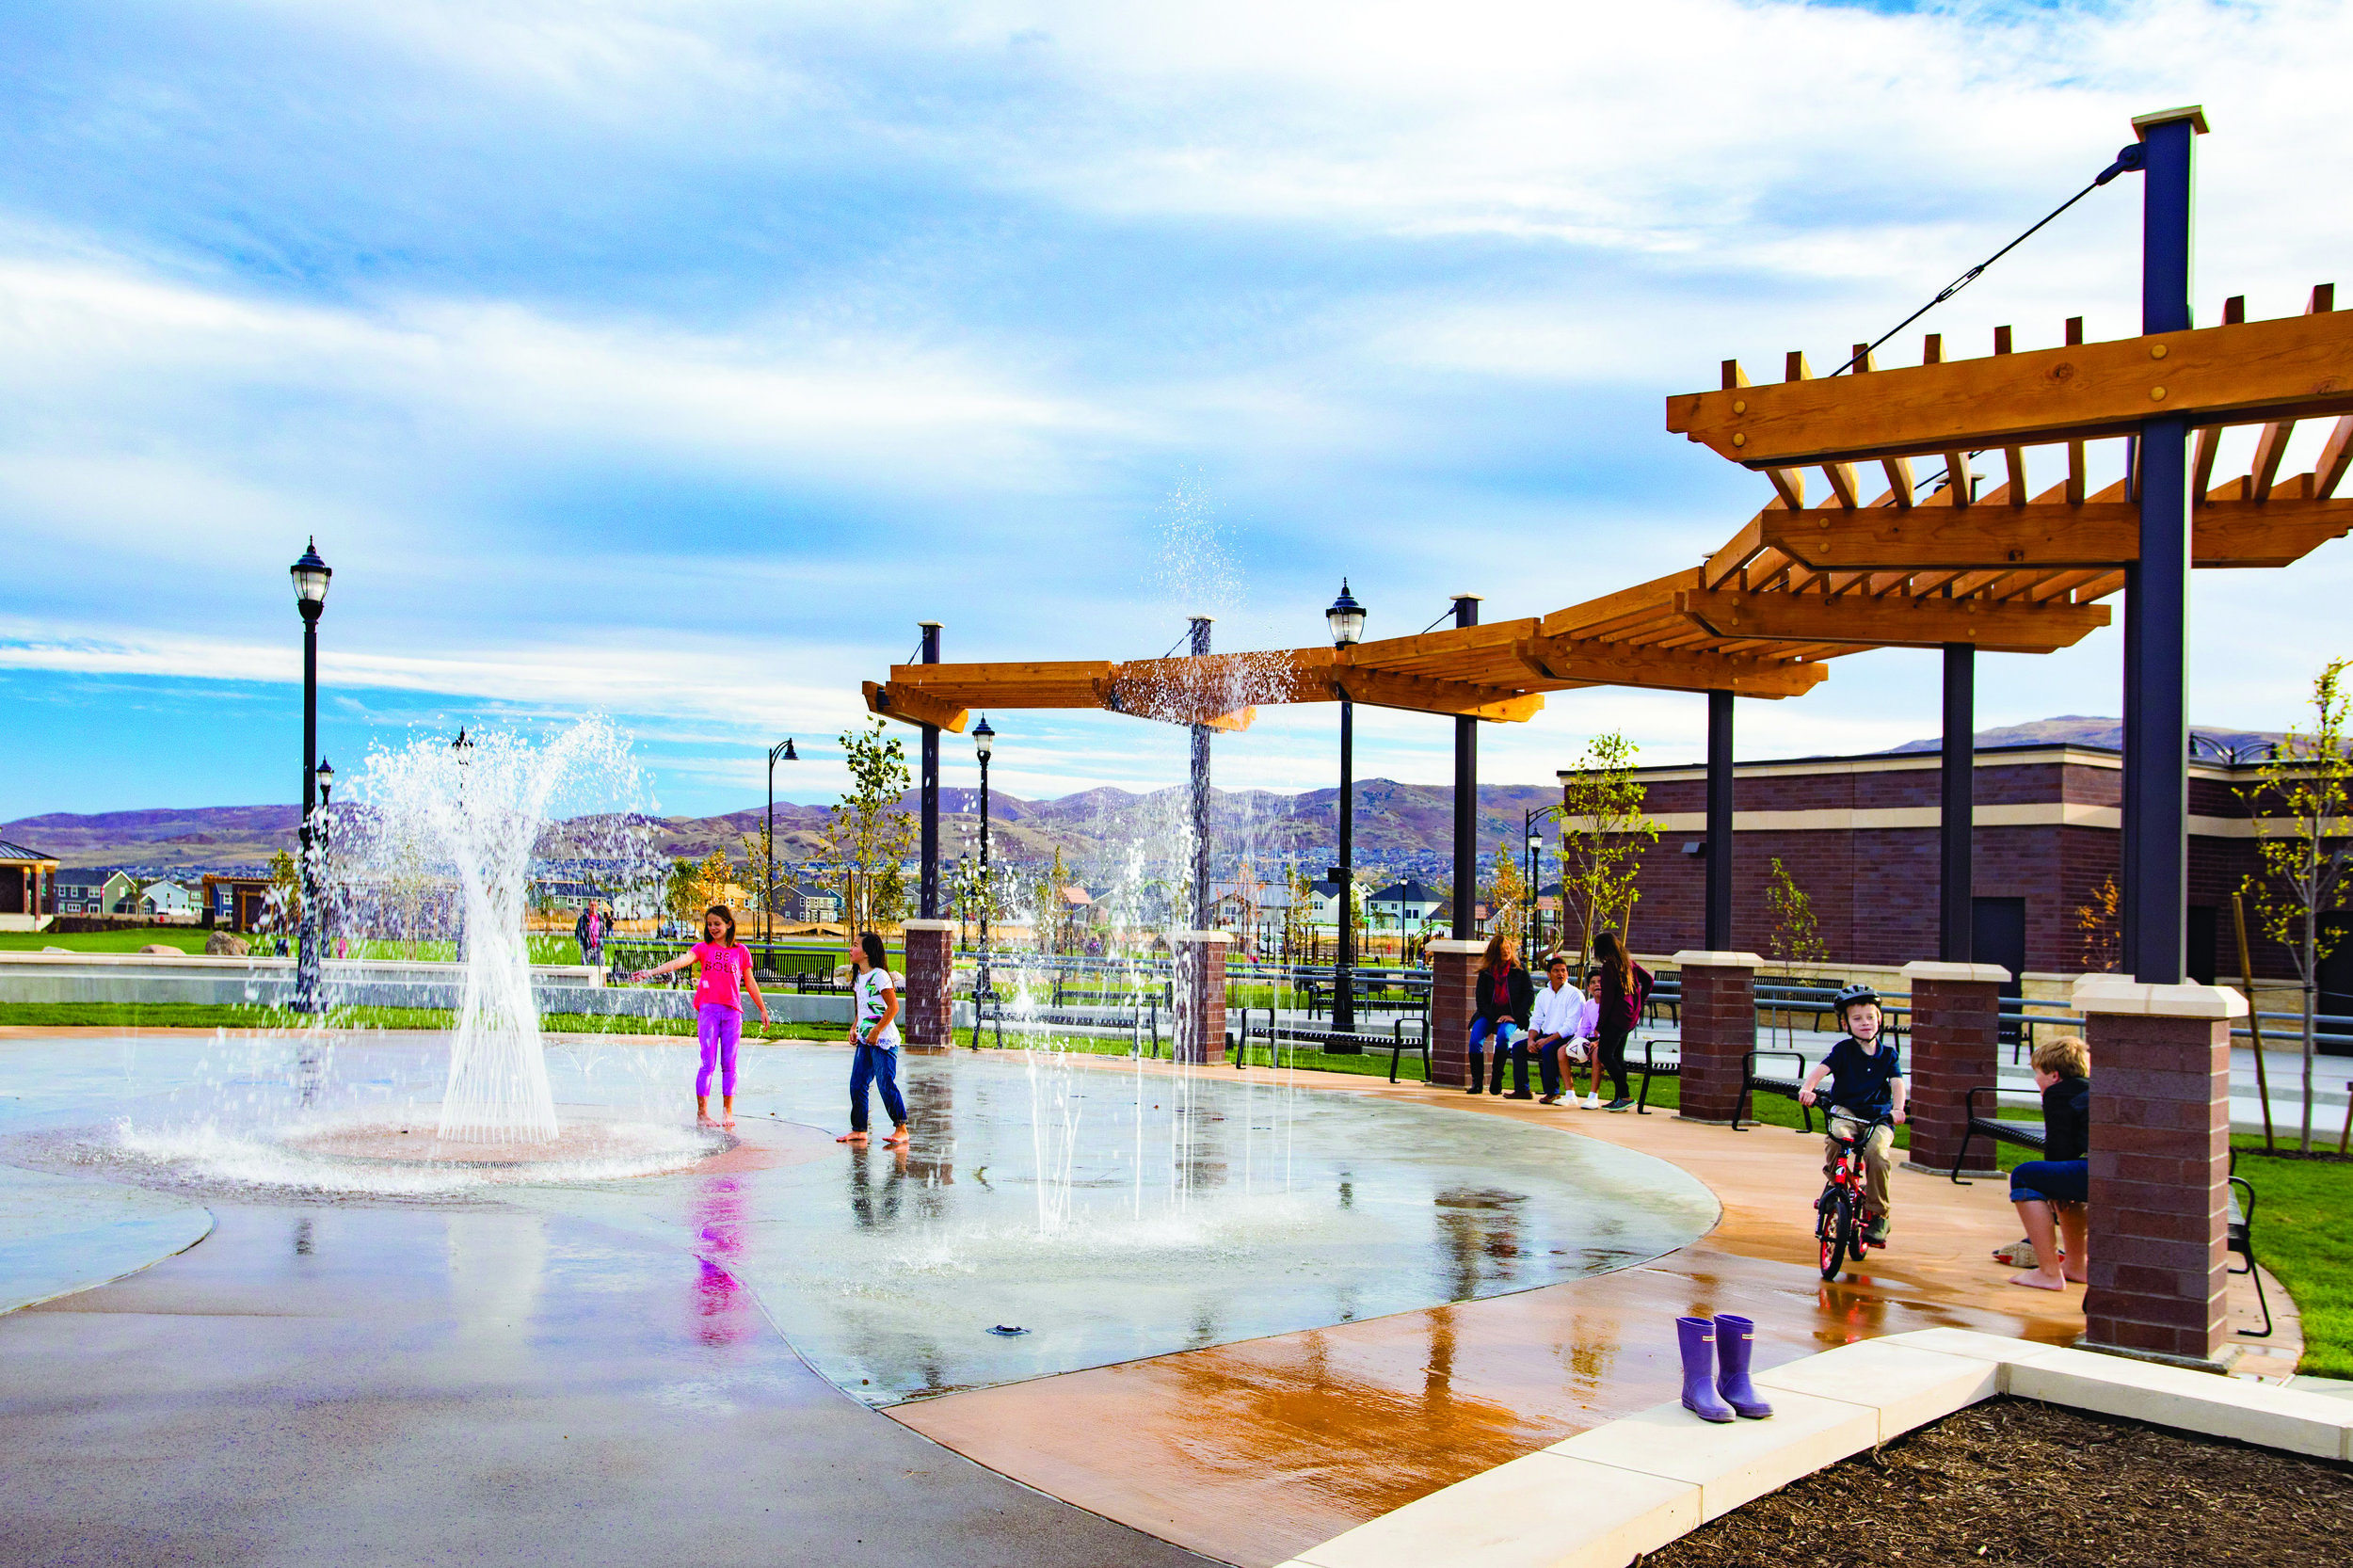  The splash pad at the southern end of Fire and Ice Plaza provides an exciting place to cool down in the summer. It is sited to fit into the implied stream that transverses the Towne Center. 